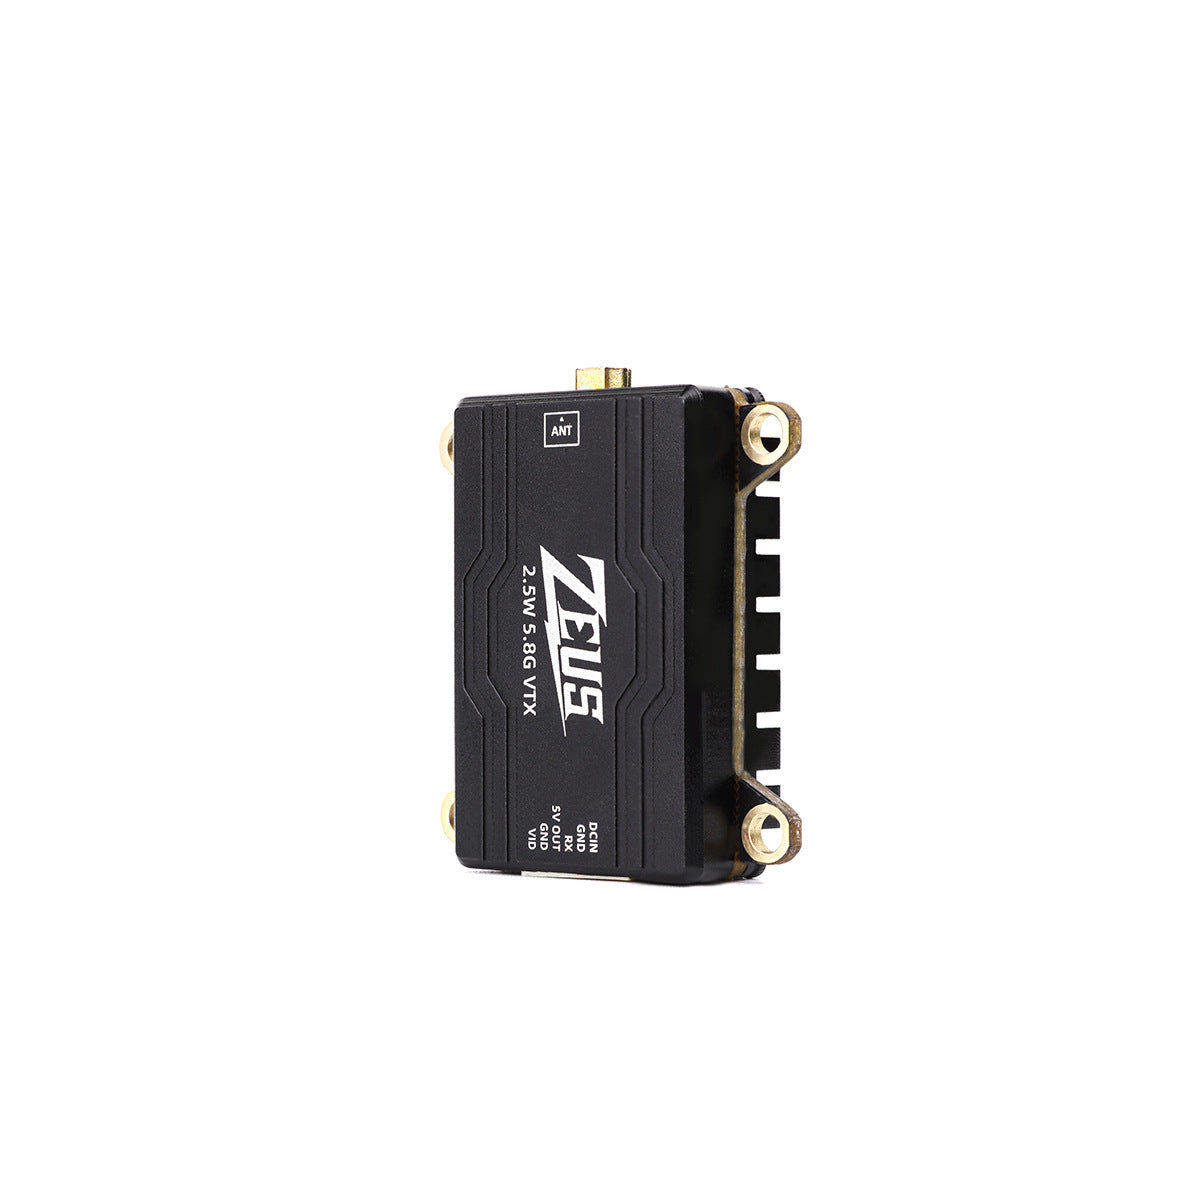 HGLRC ZEUS VTX 2.5W 5.8G 40CH High Power 2500mW Image Transmission Adjustable Power Aerial Photography Travel FPV